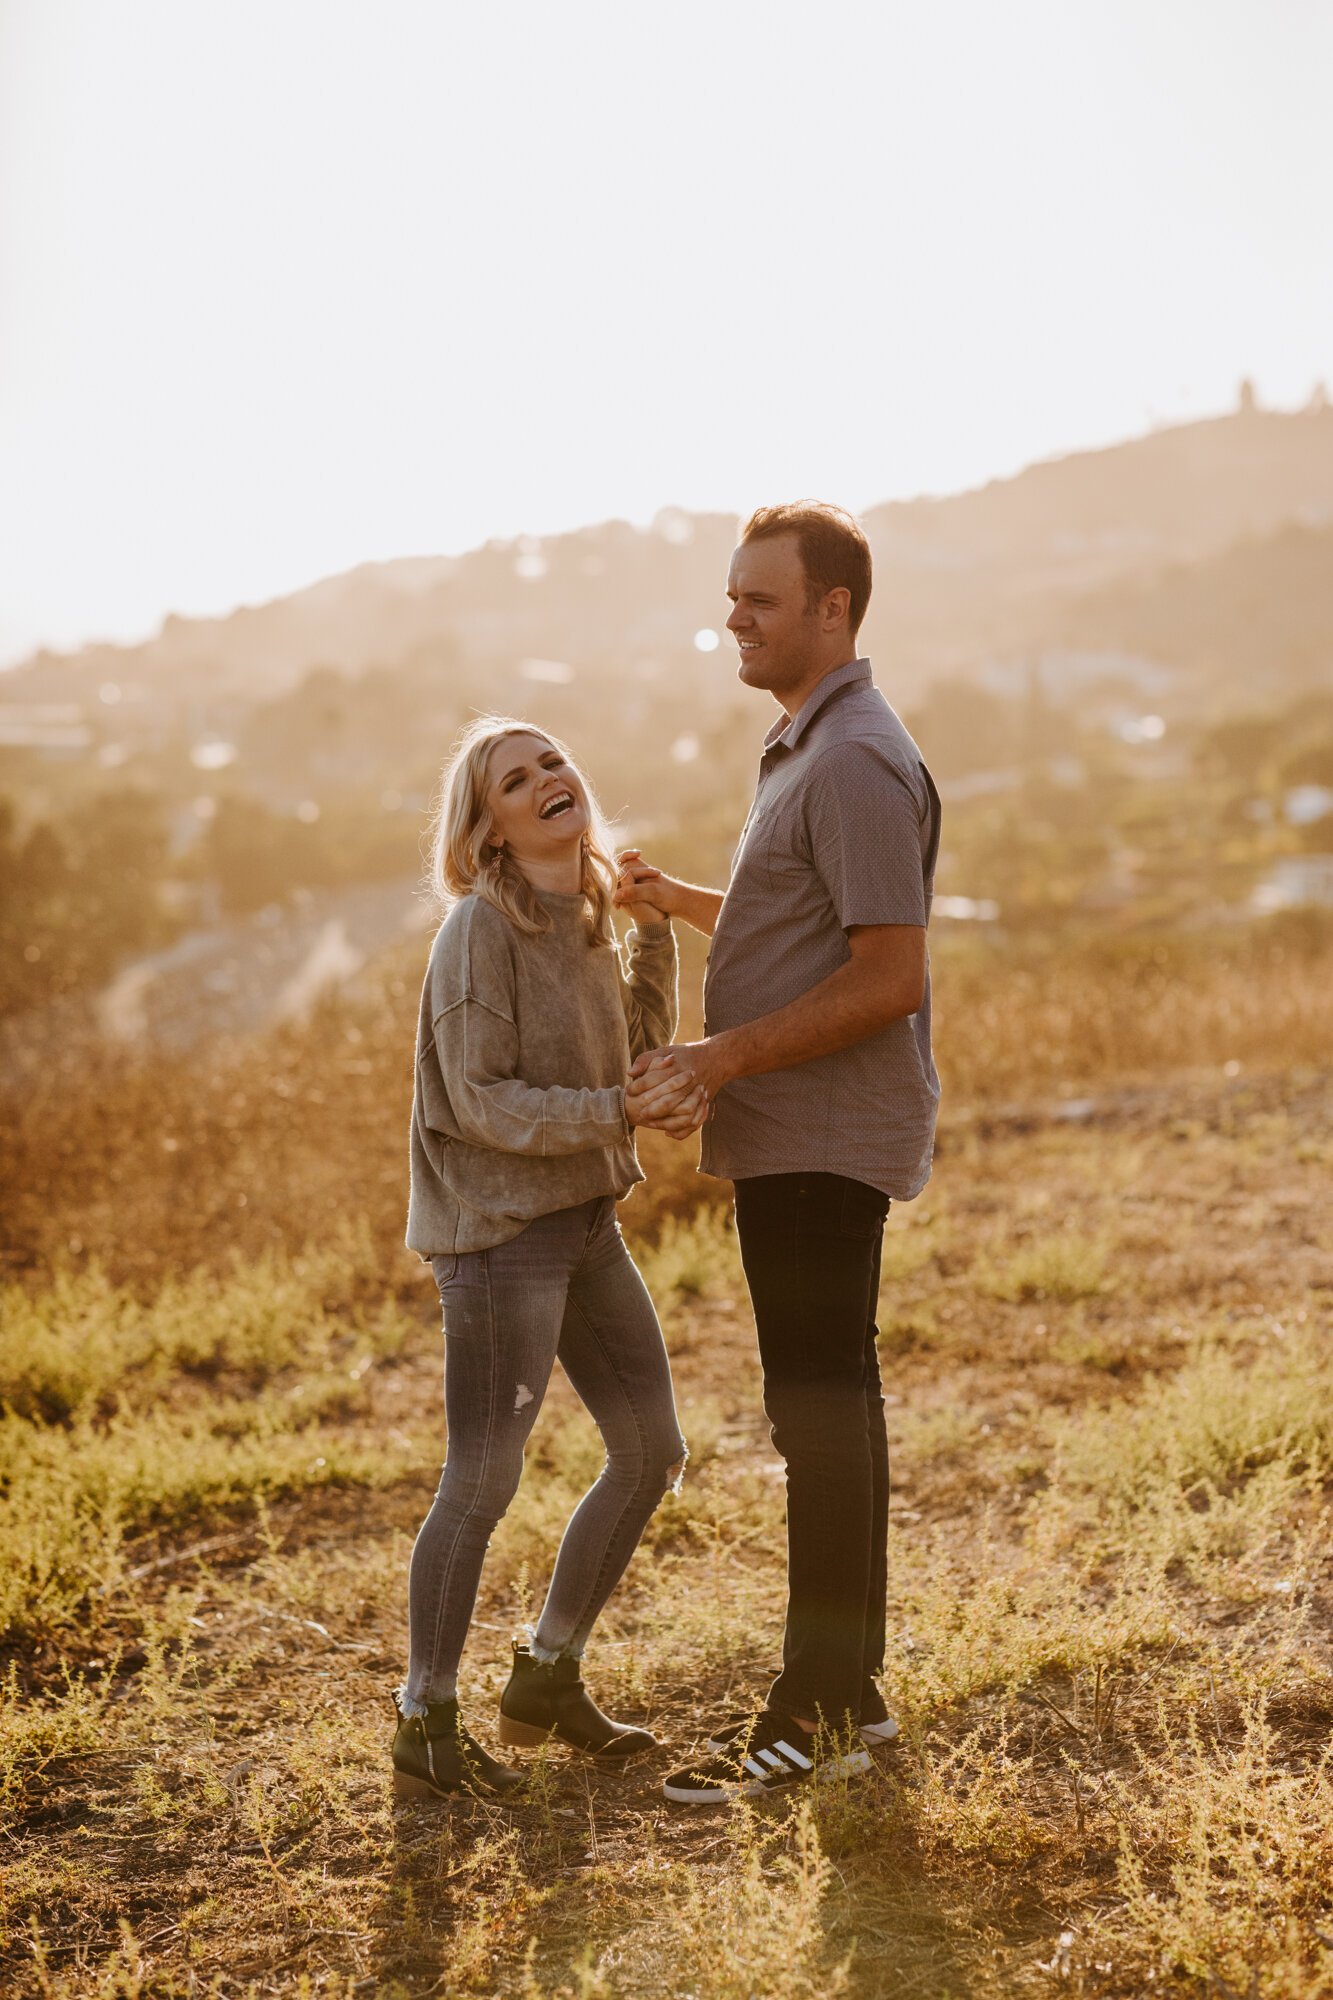 Rancho Palos Verdes Engagement Session at Catalina View Gardens, California Wedding Photographer, Los Angeles Wedding Photographer, Winery Wedding Venue, Sunset Couples Photos, Photo by Tida Svy